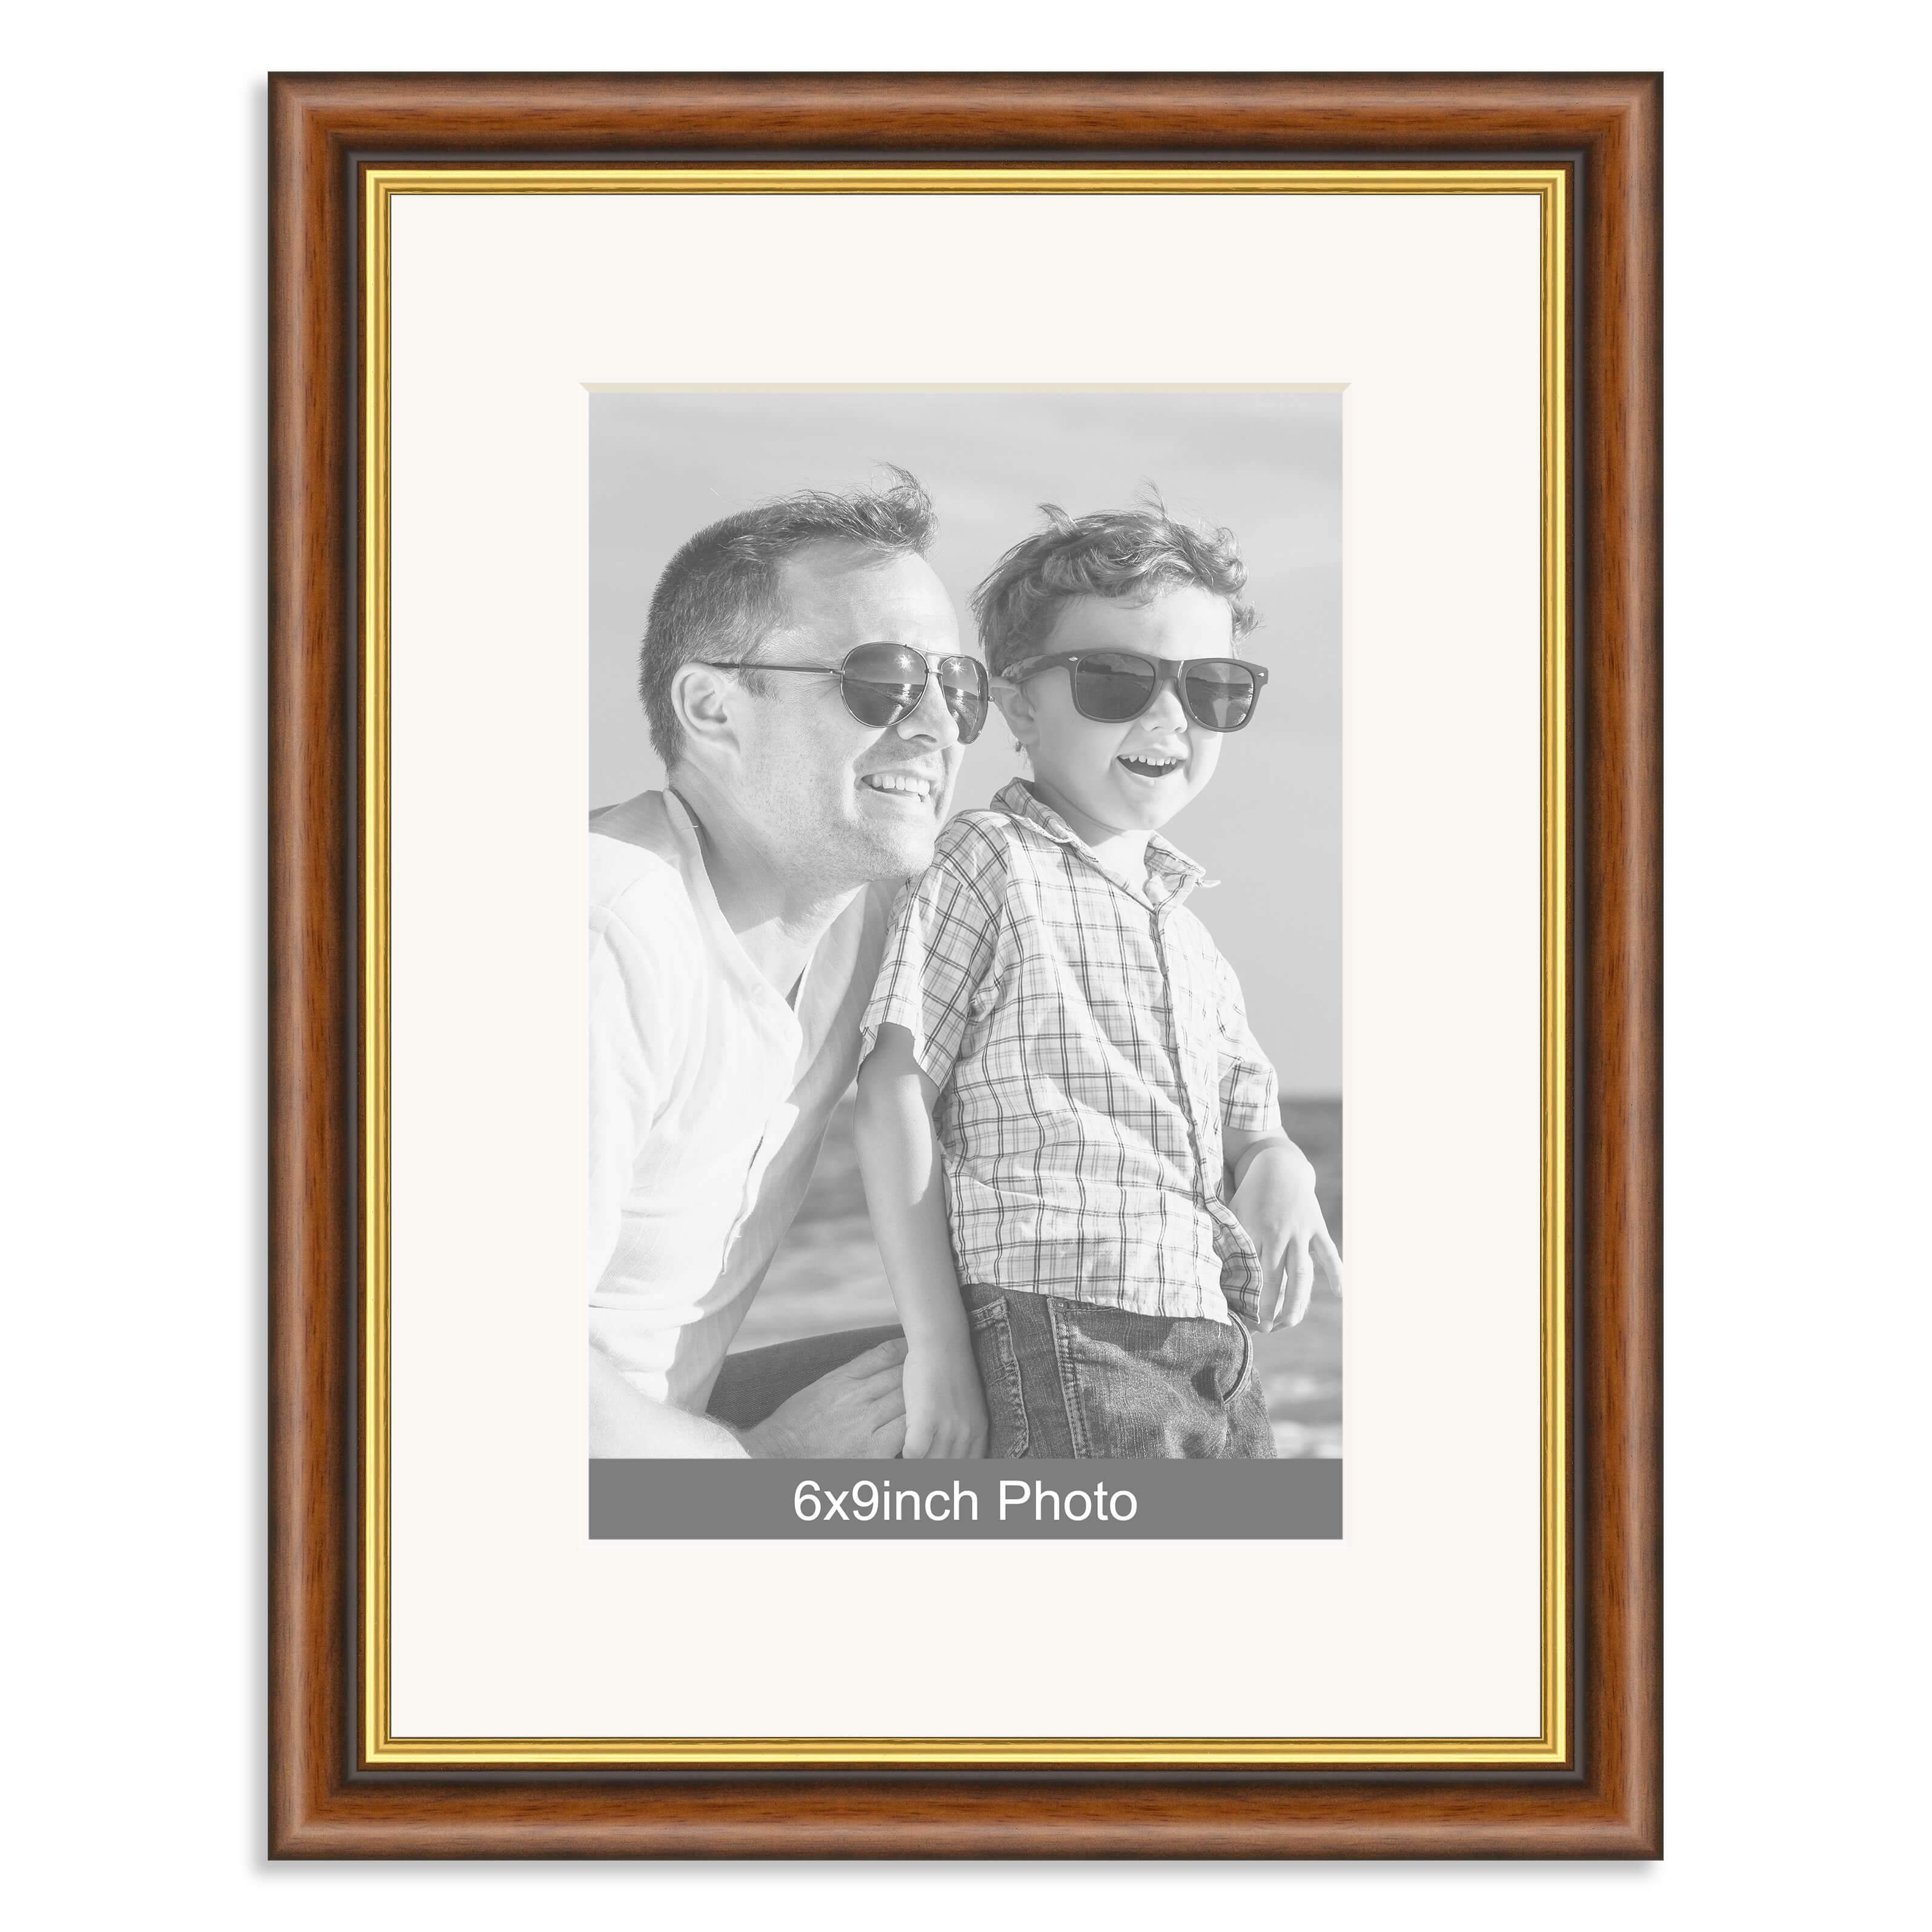 Mahogany & Gold Wooden Photo Frame with mount for a 9×6/6x9in Photo – Photo to follow by email